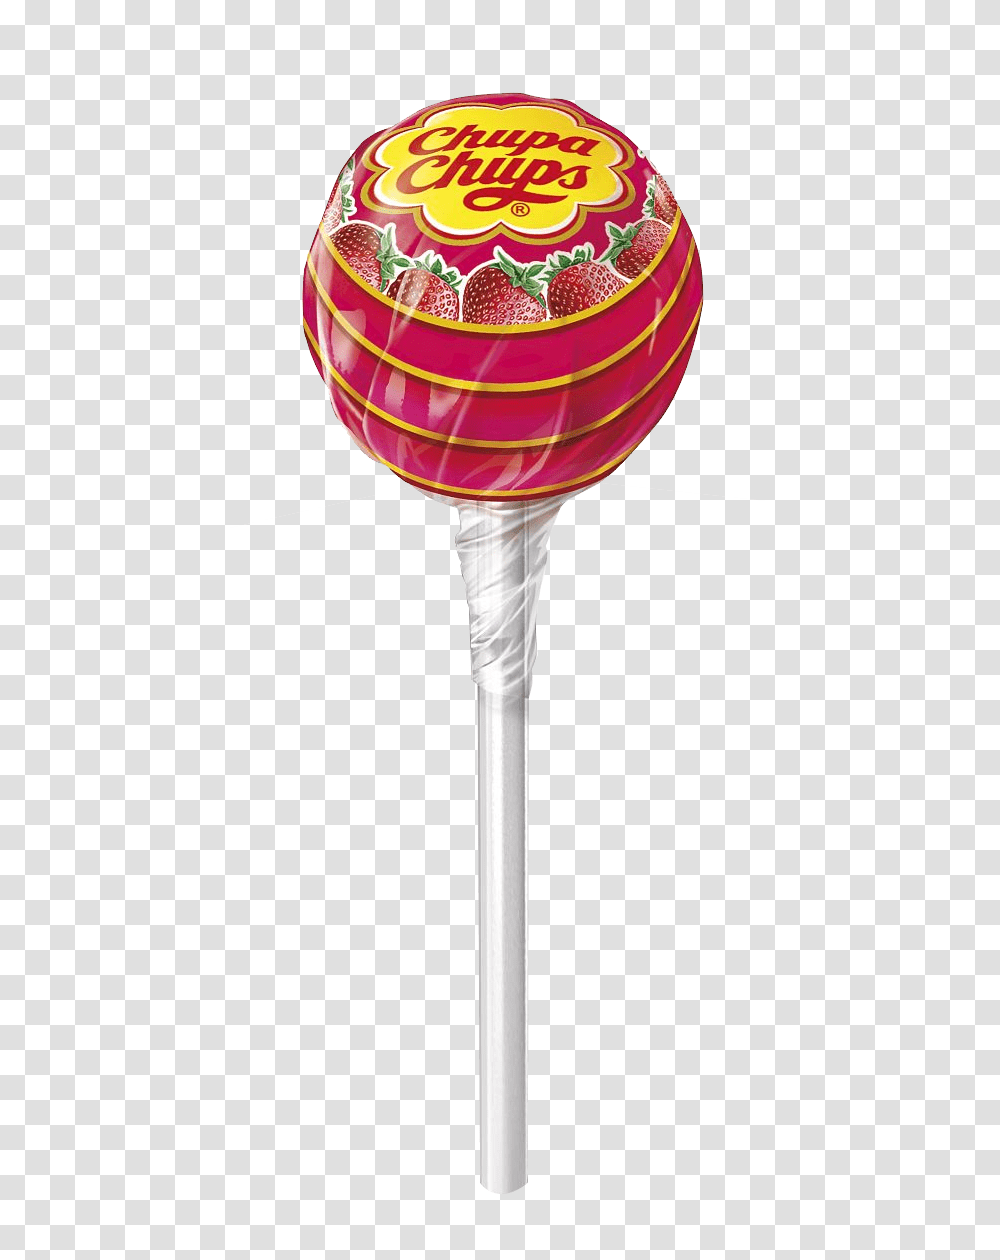 Chupa Chups, Food, Sweets, Confectionery, Candy Transparent Png